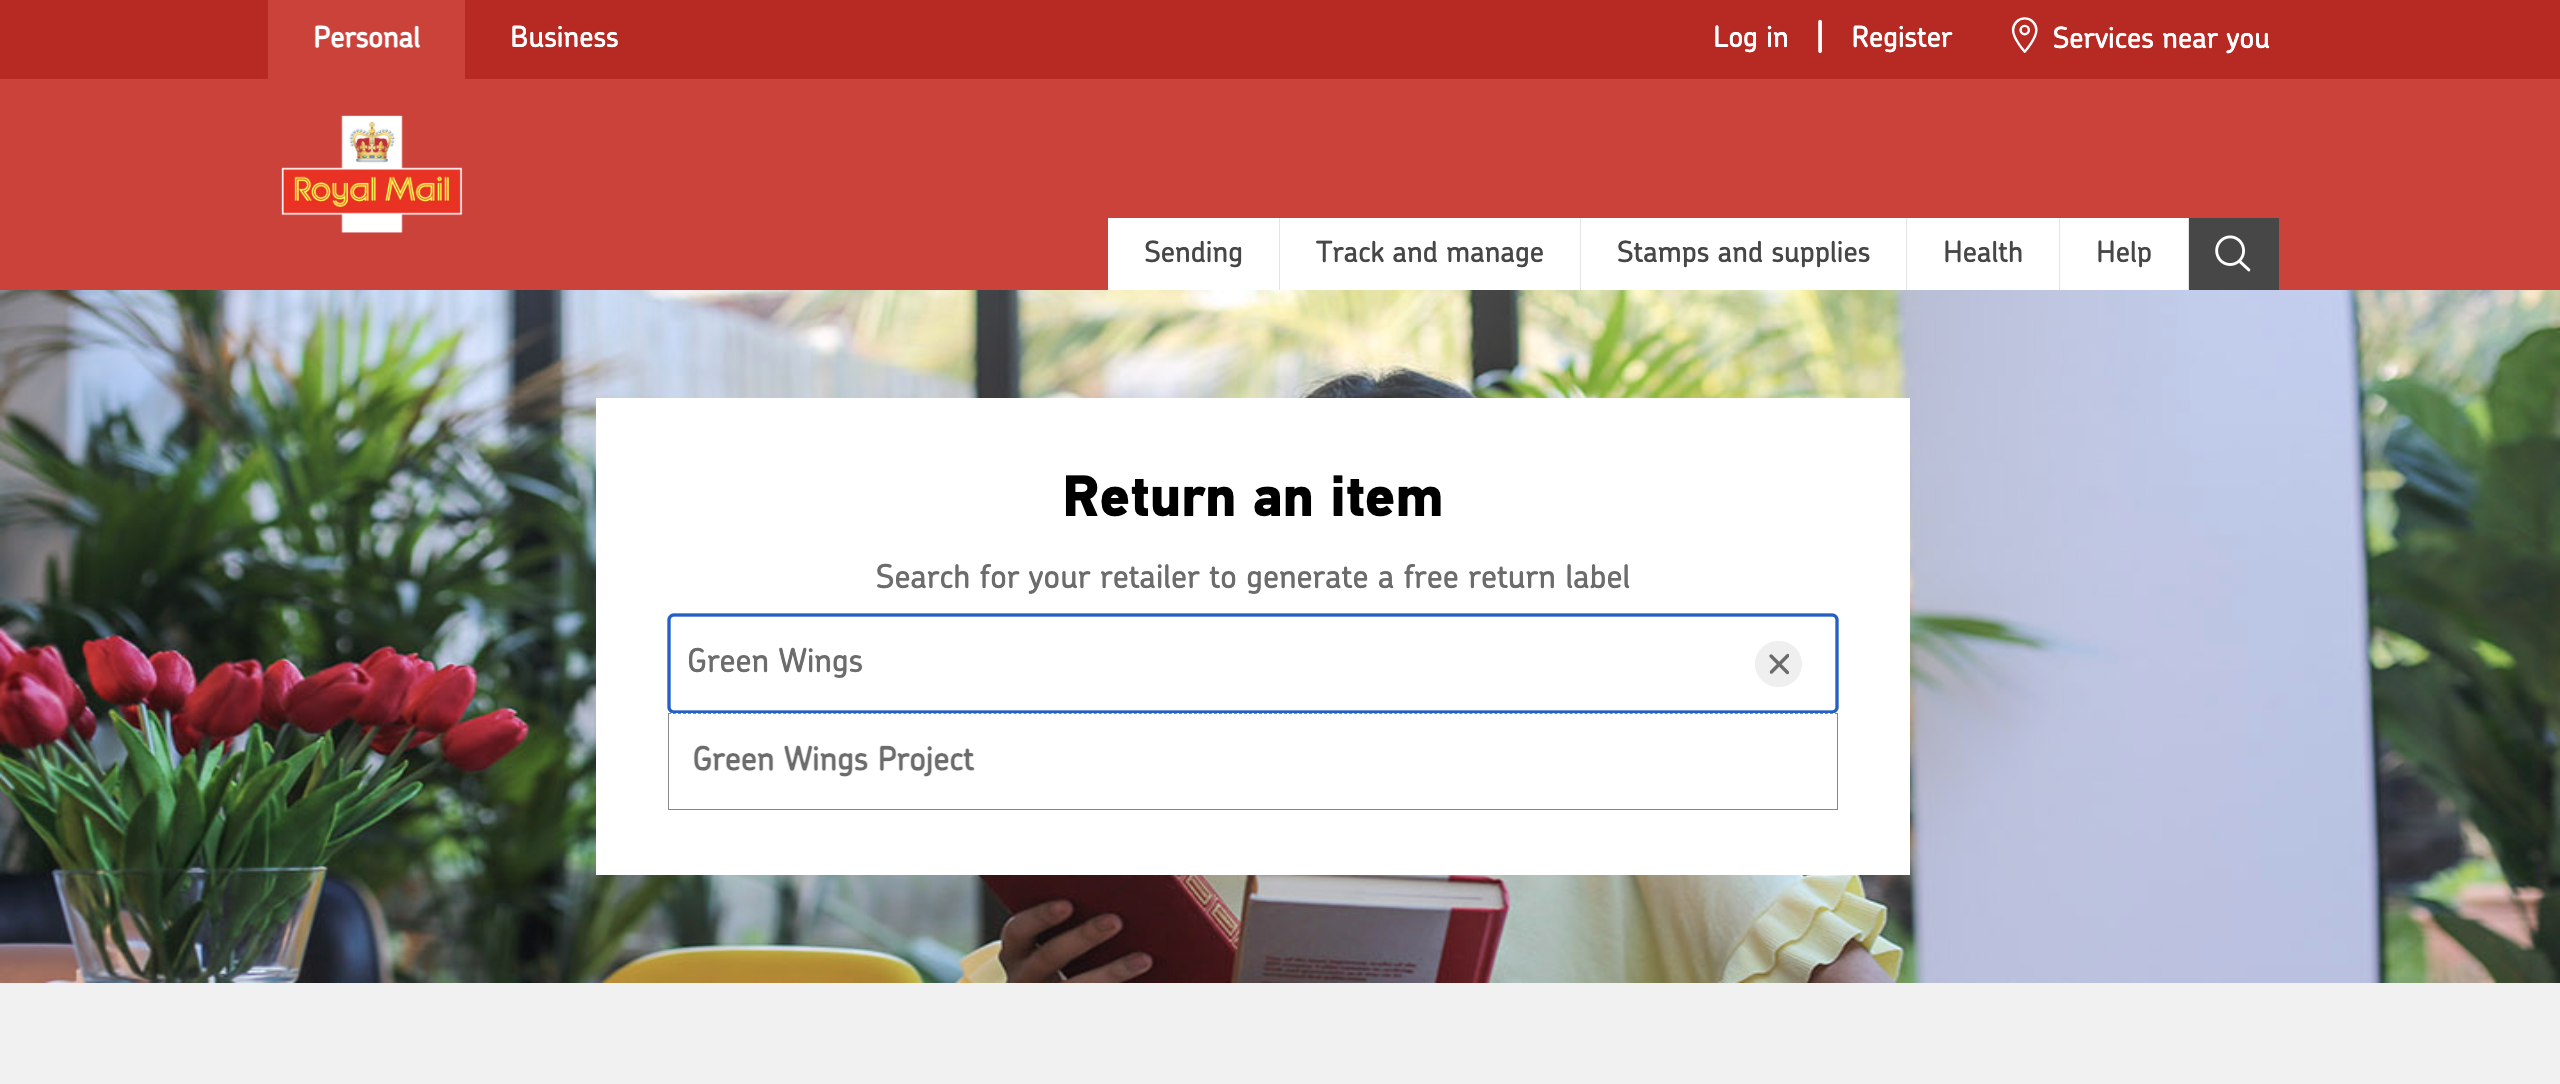 Simply search for “Green Wings Project” on Royal Mail Returns and generate your free shipping label today.